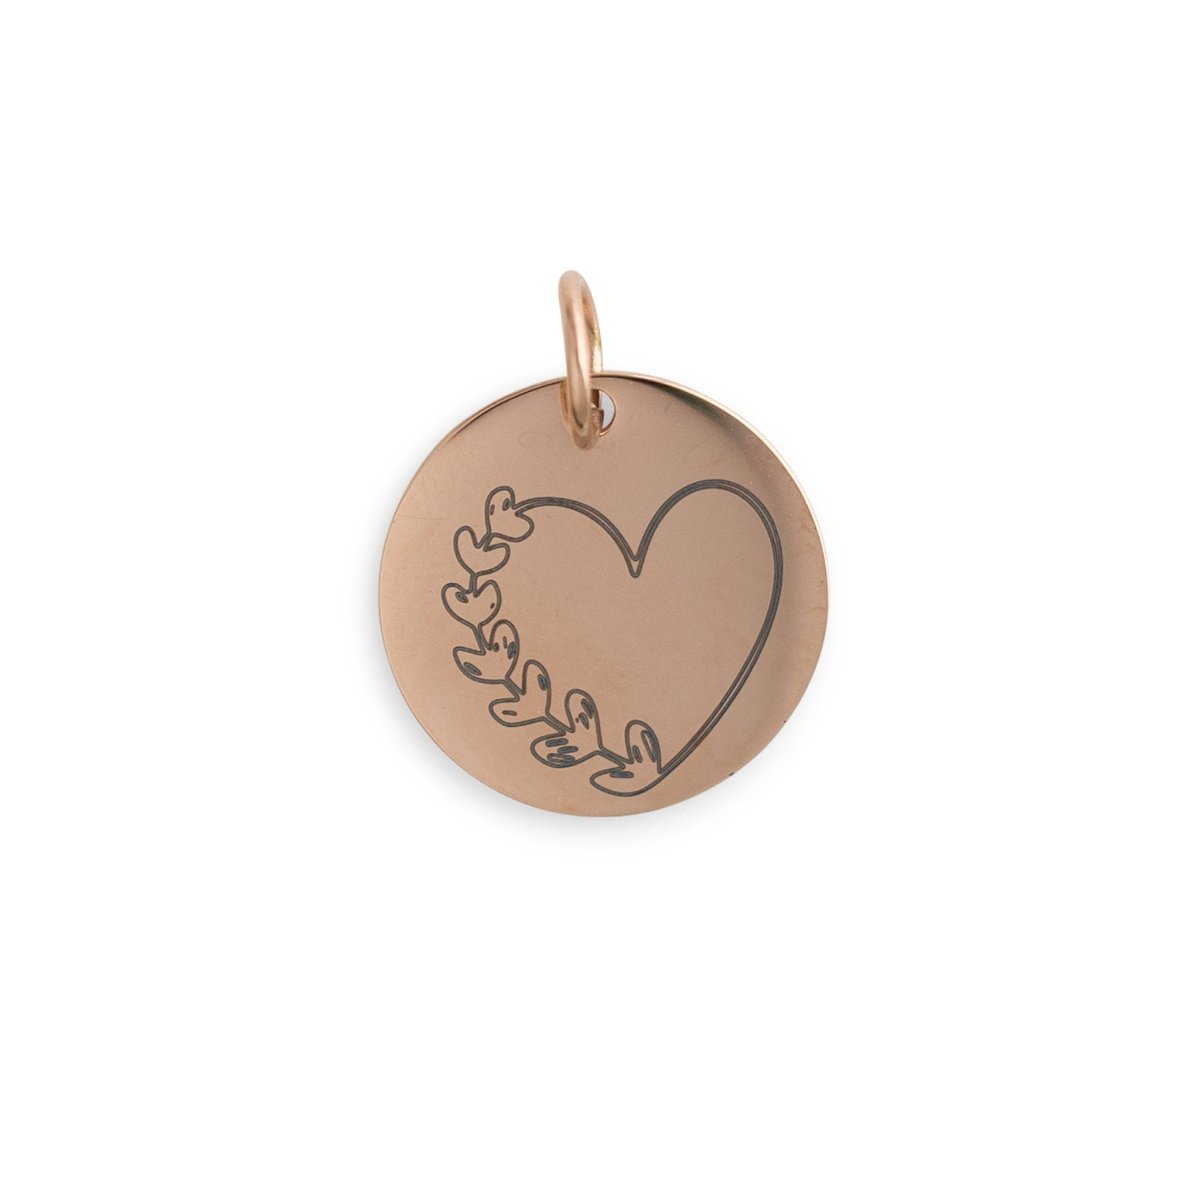 Accessories Charms - Stainless Steel Rose Gold from Cara & Co Craft Supply